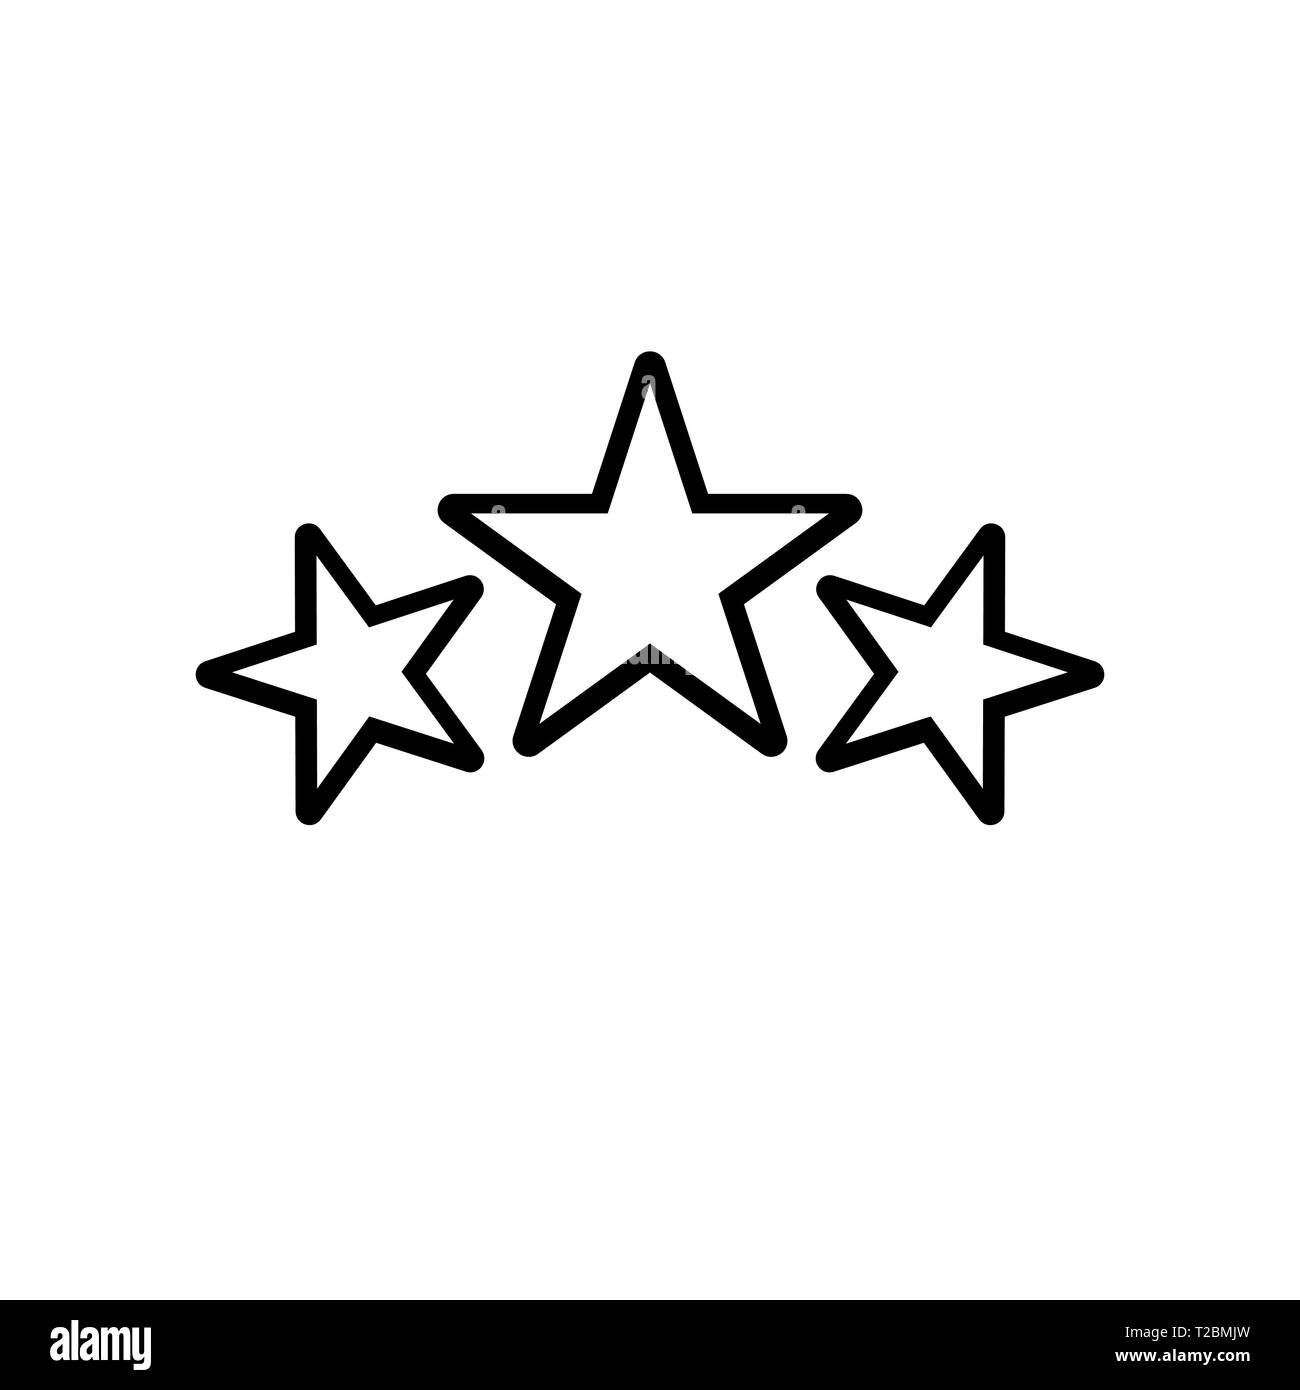 Award icon, stars logo in line style. Winner symbol isolated on white background. Simple abstract awards icon in black. Vector illustration for graphi Stock Vector